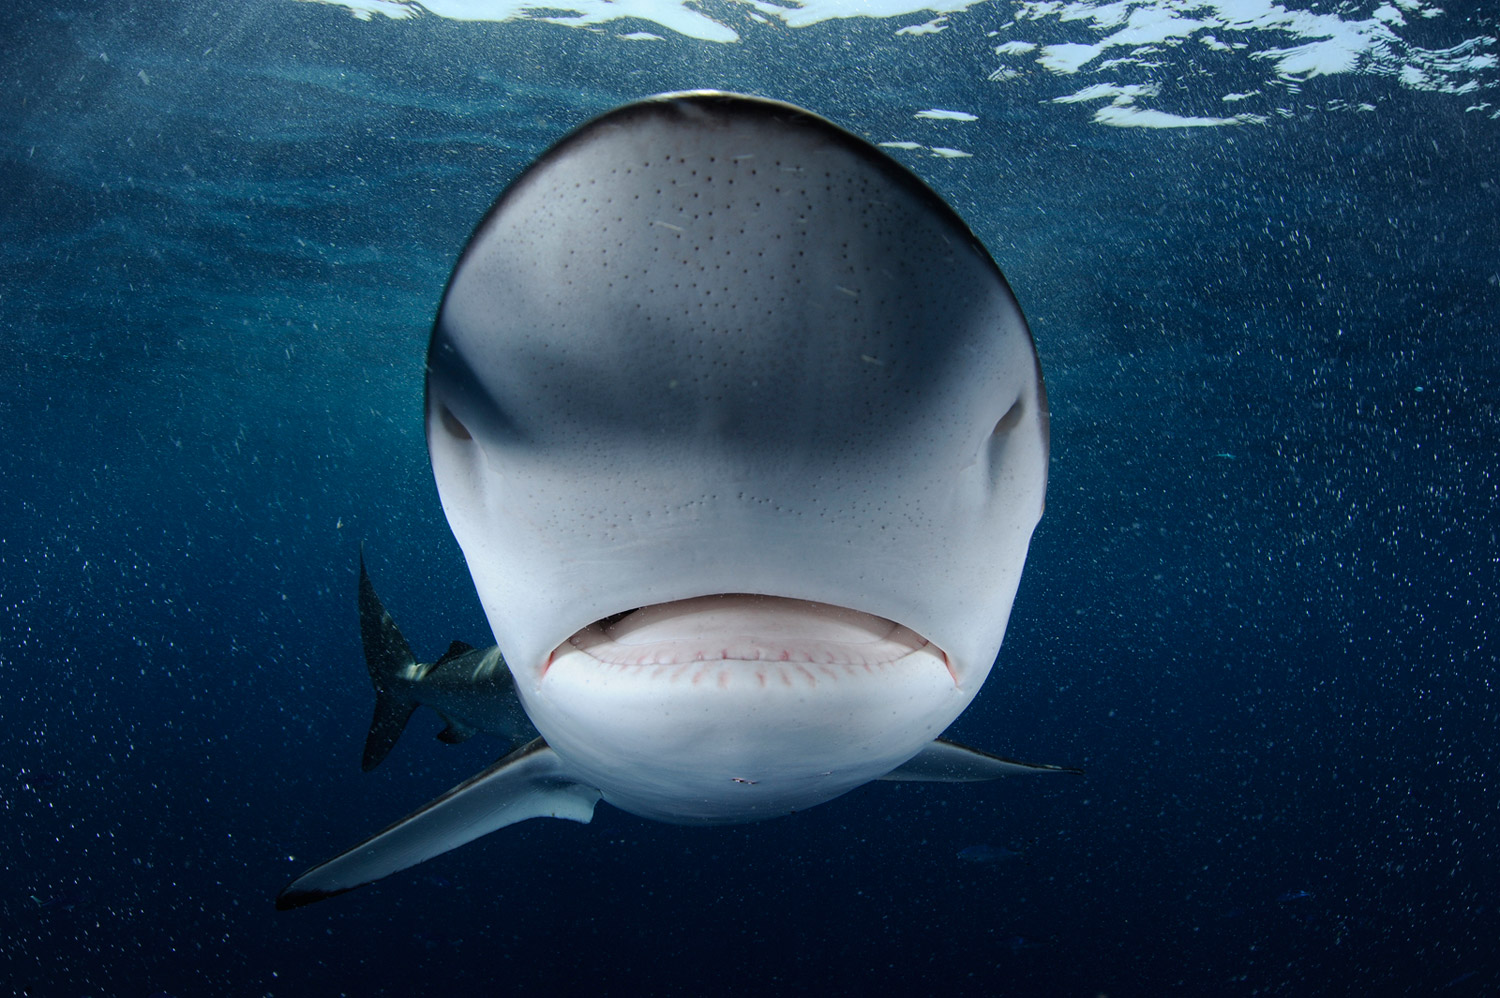 All photos in this series were taken between 2008 and 2012.
                              A curious Red Sea silky shark bumps the dome port of the photographer’s camera.